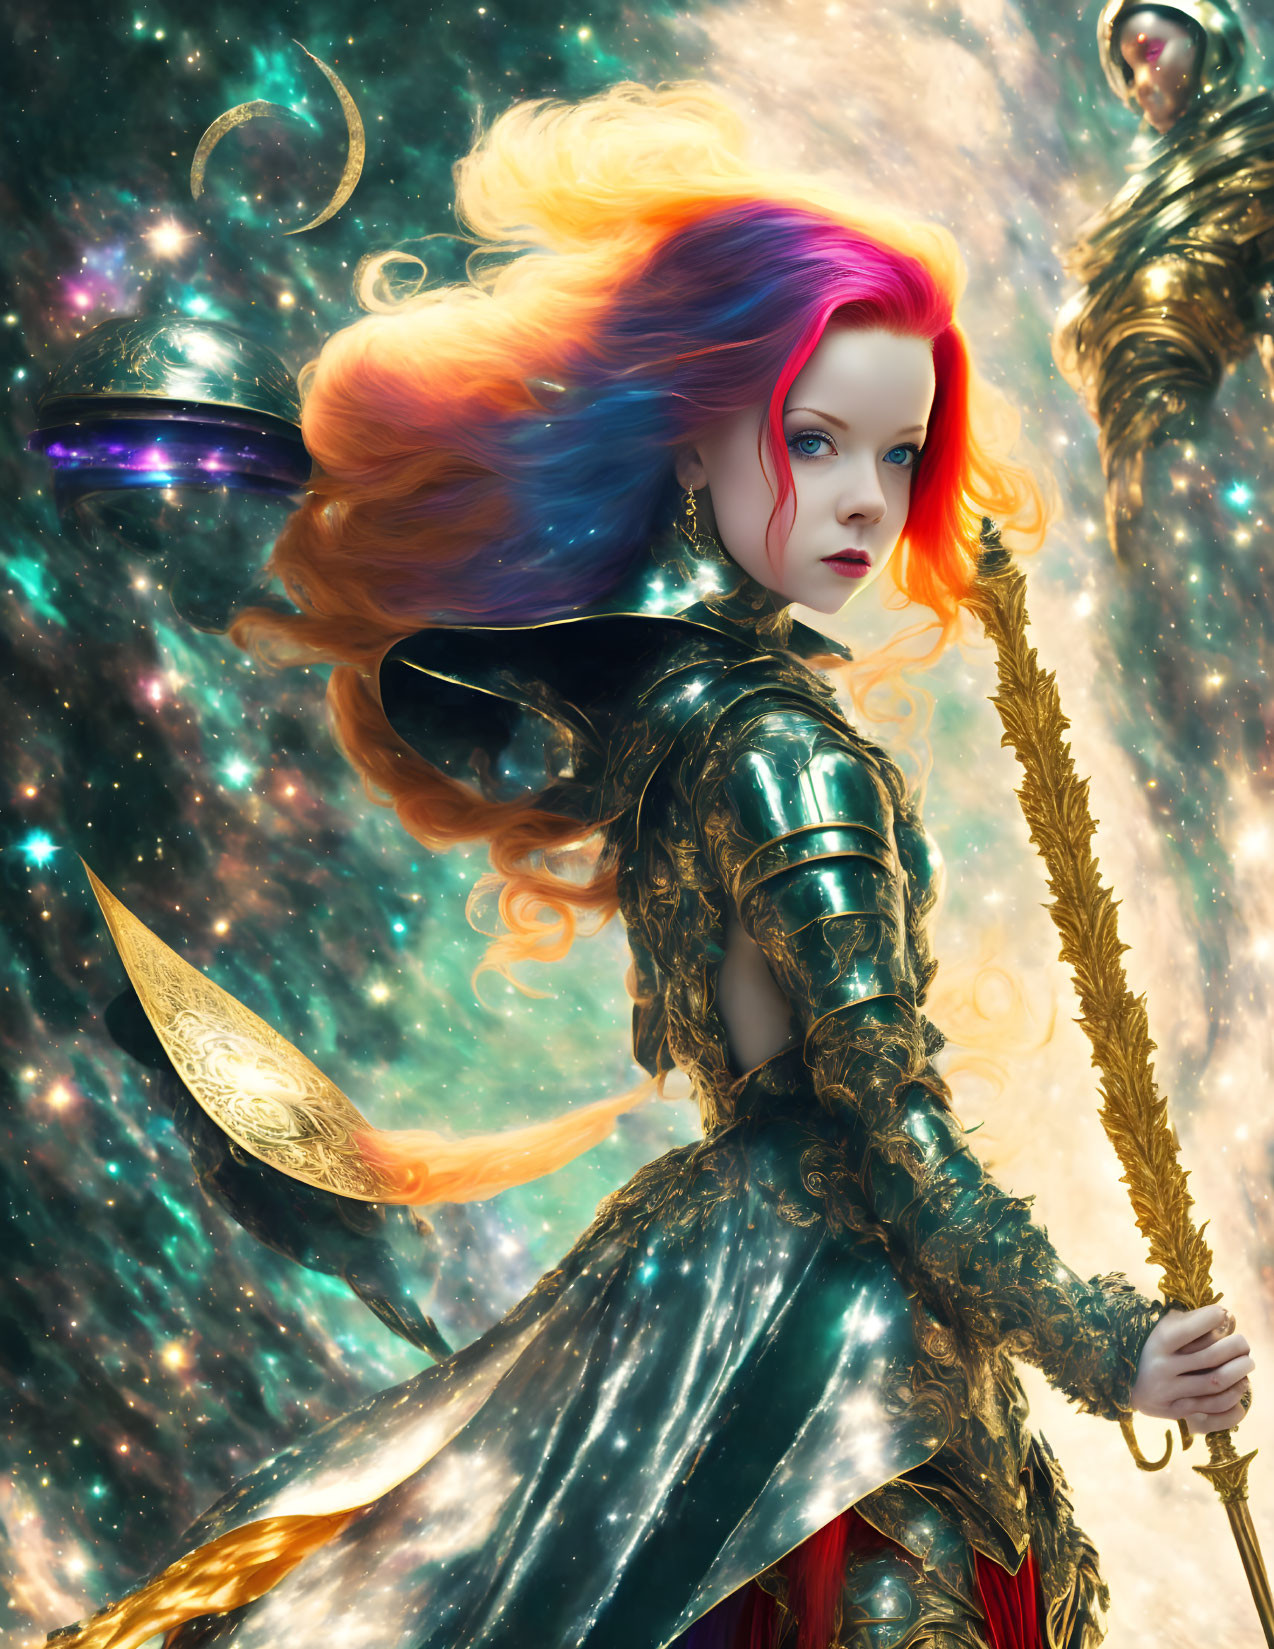 Colorful-haired woman in cosmic armor with staff on vibrant digital art